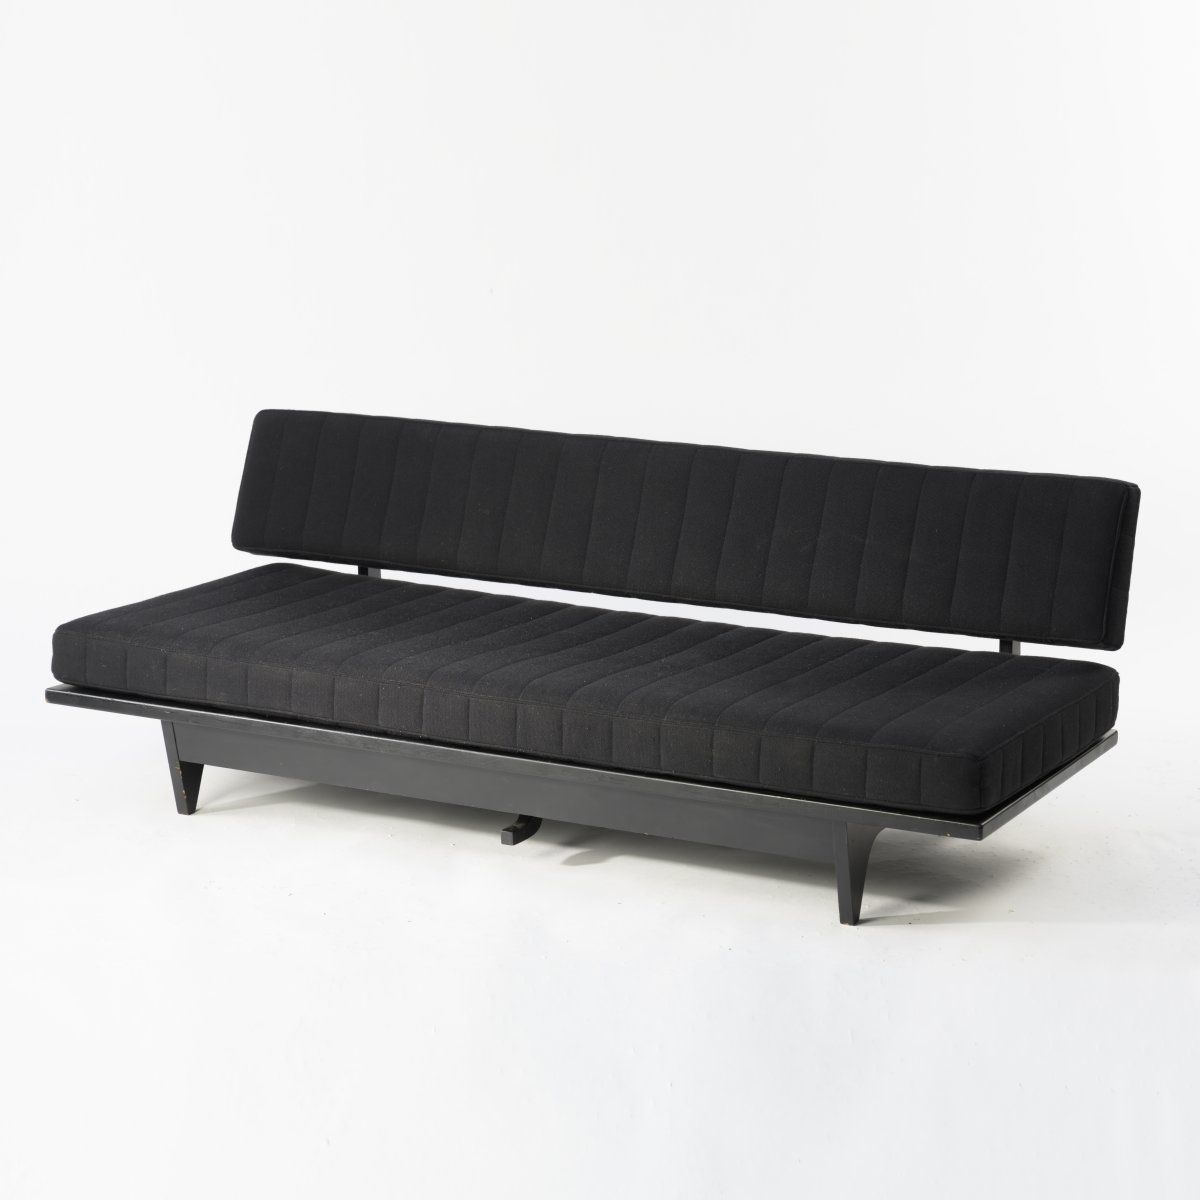 Null Richard Stein							, '700' sofa bed, 1947, H. 68 x 195 x 93 cm. Made by Kn&hellip;